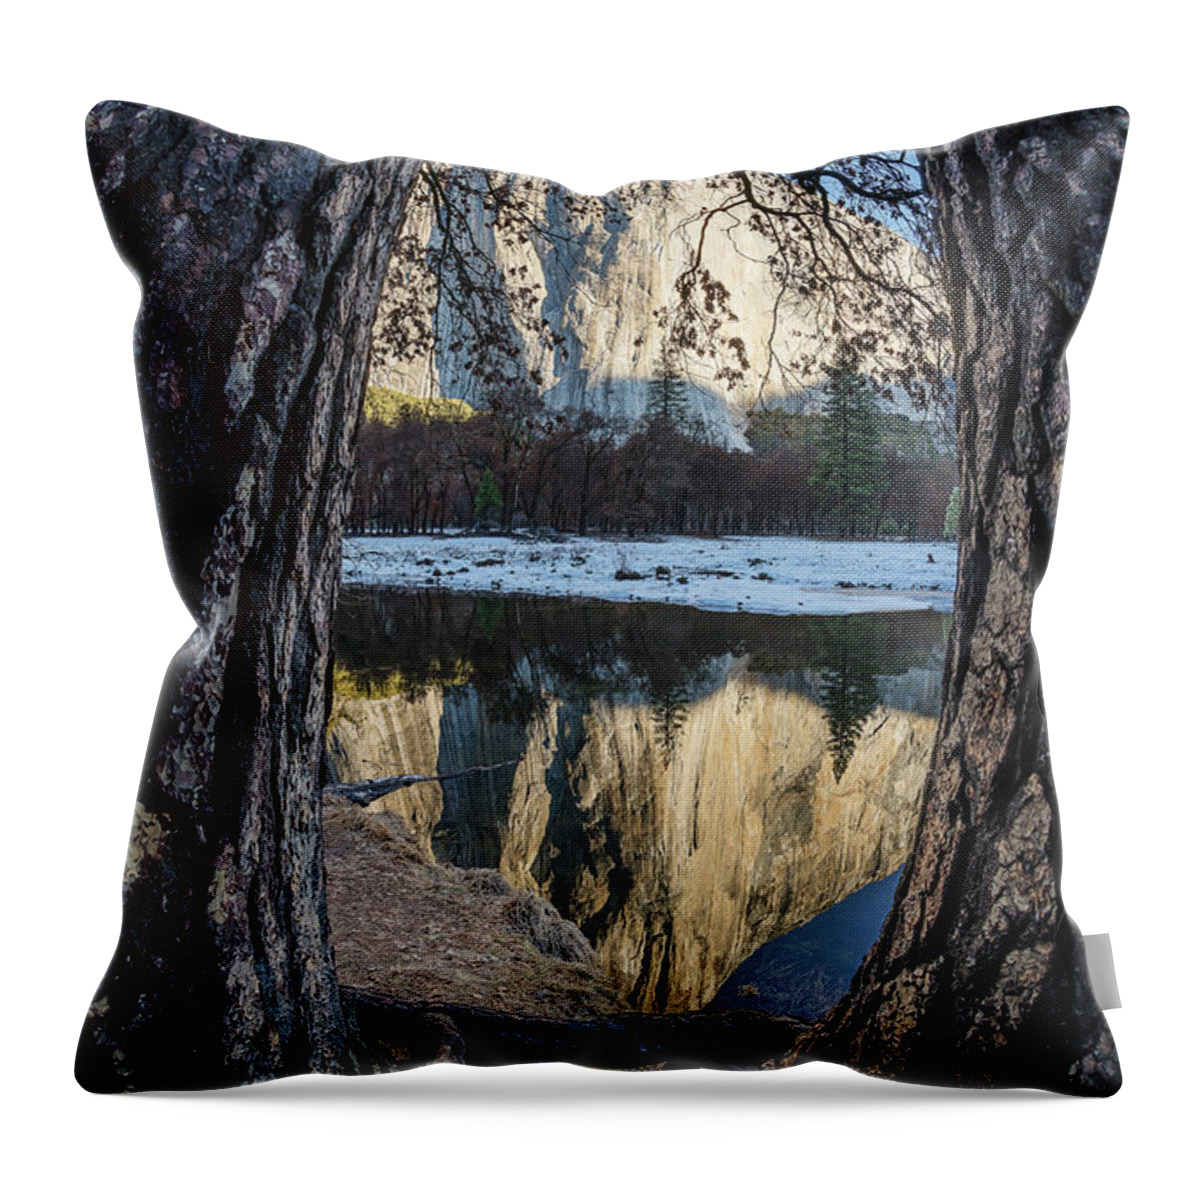 California Landscape Throw Pillow featuring the photograph El Capitan Through the Trees by Bill Roberts